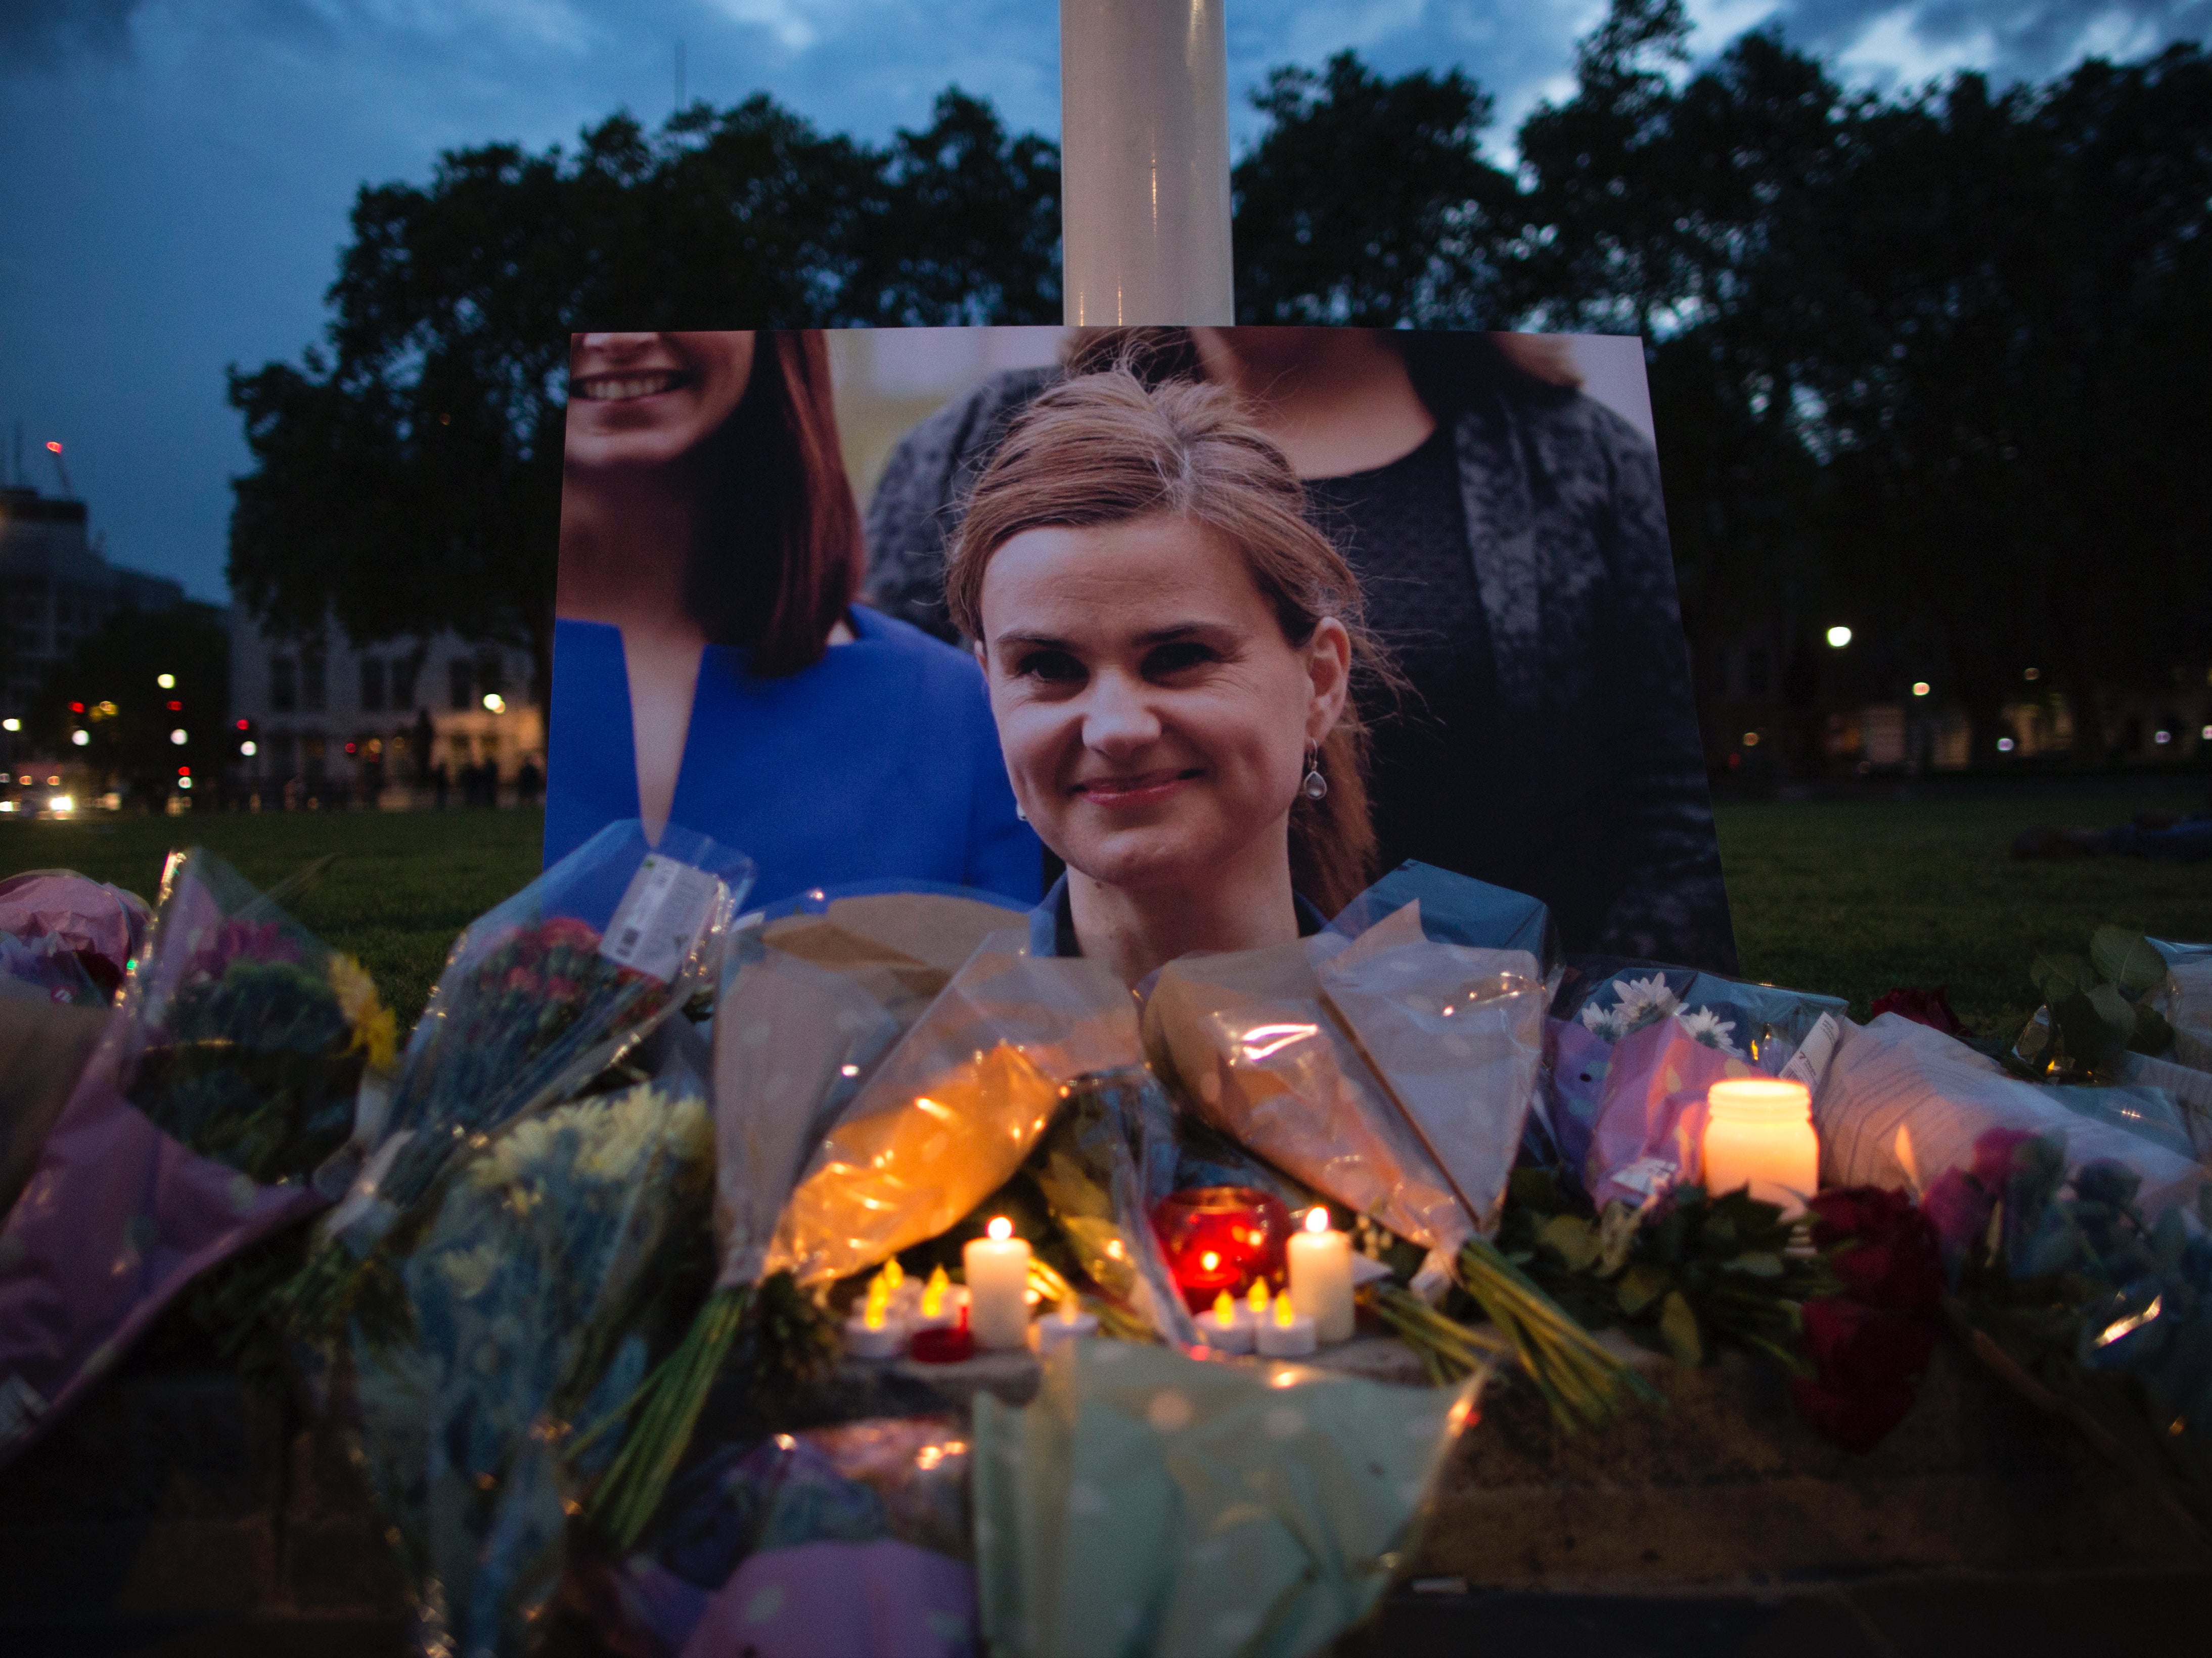 Jo Cox, Labour MP for Batley and Seen, was shot and stabbed at her constituency in Birstall, England, in 2016